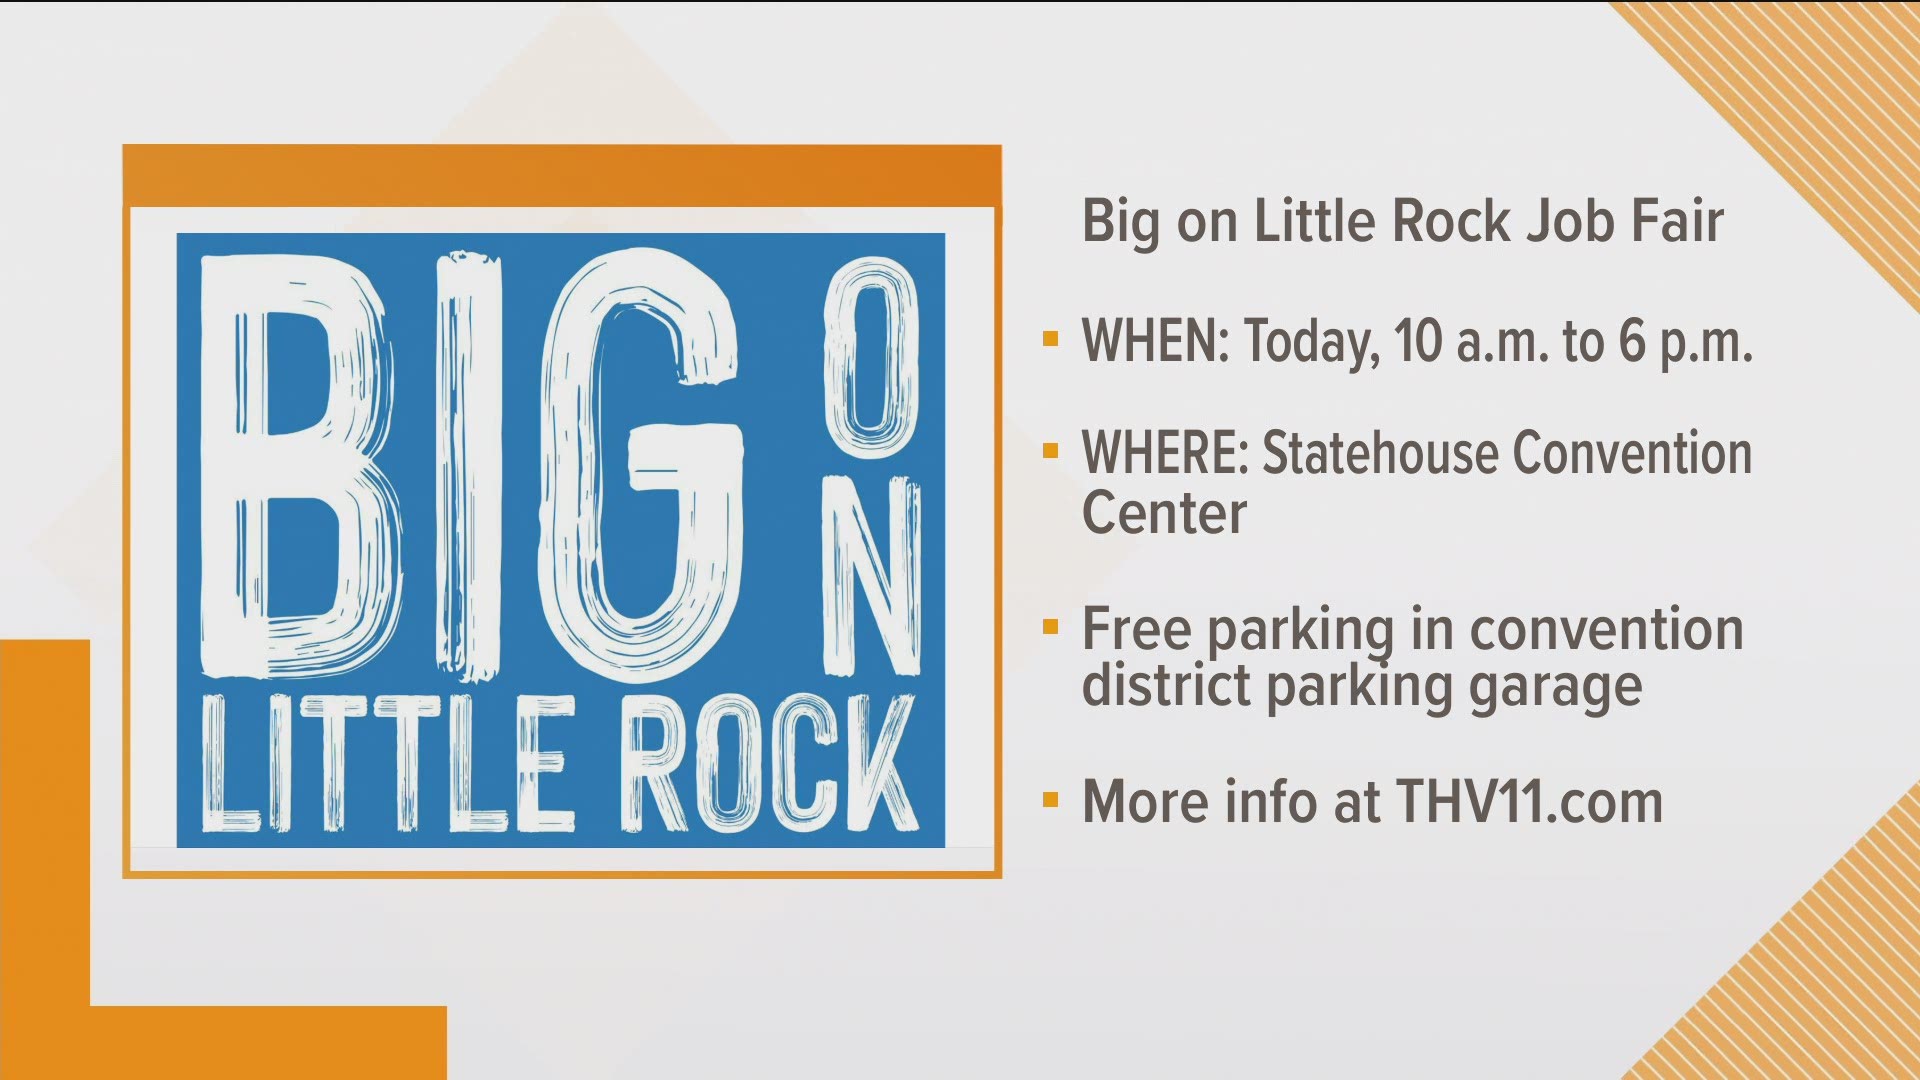 'Big on Little Rock' job fair at the Statehouse Convention Center